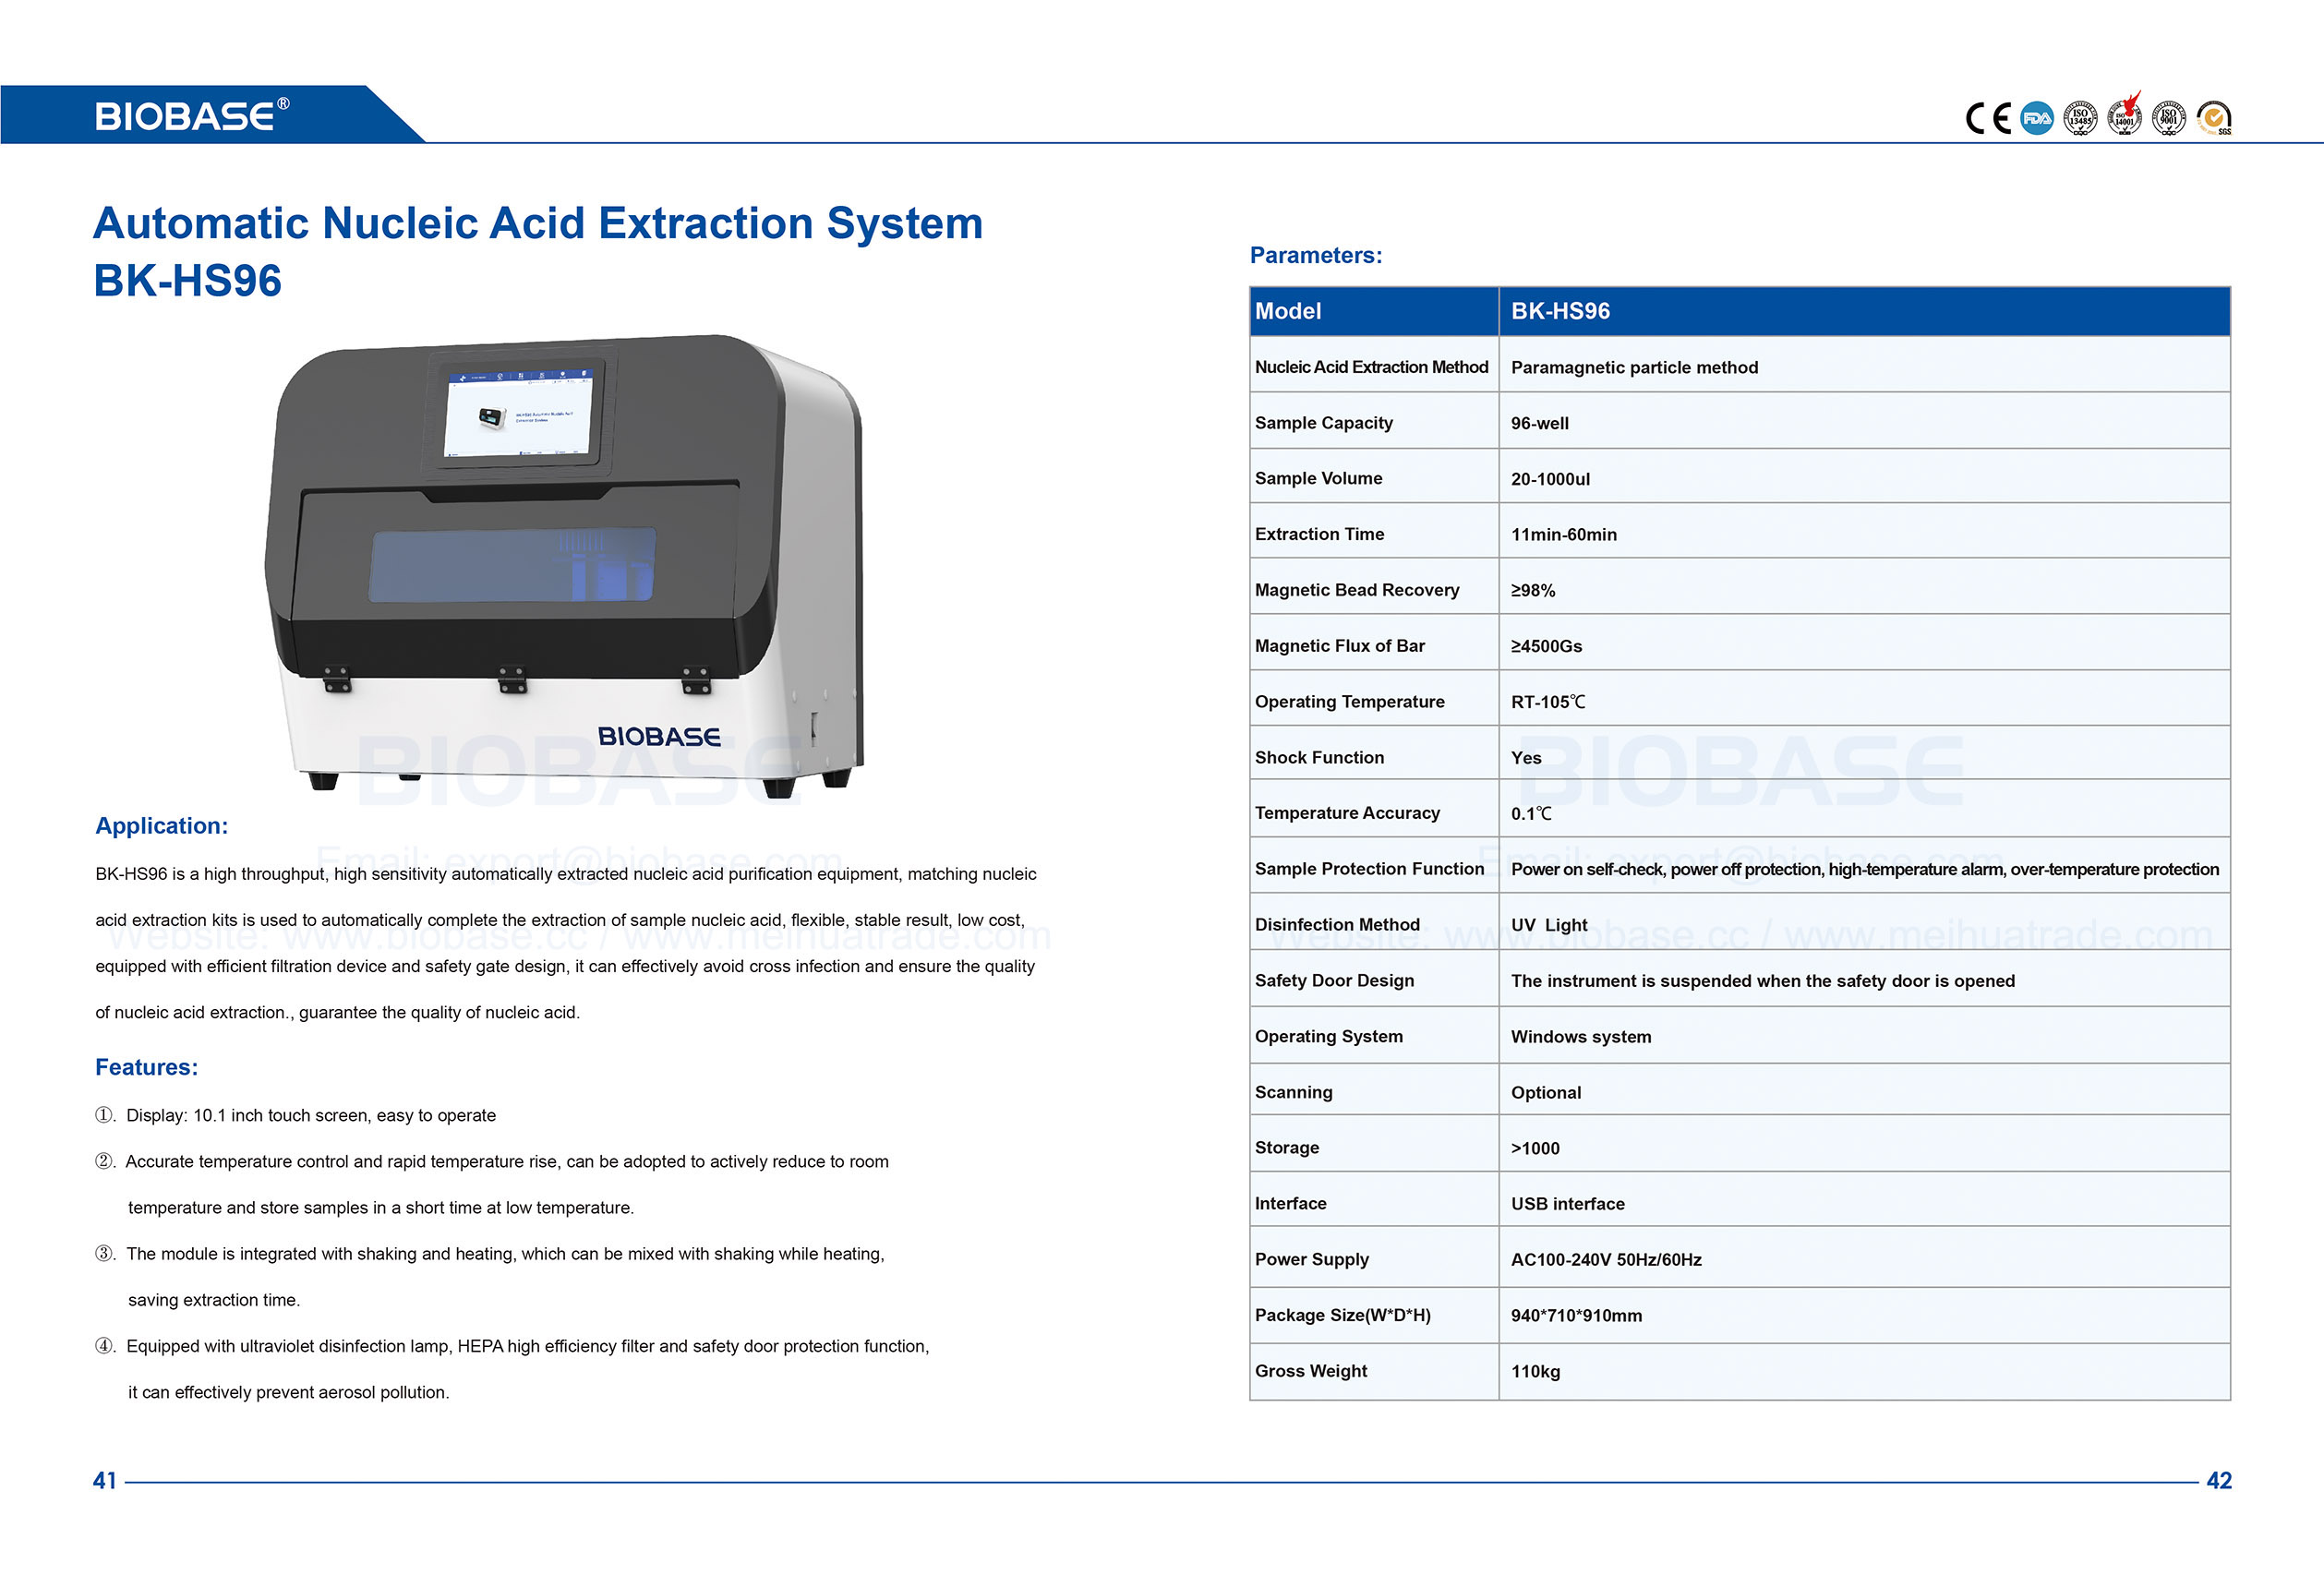 41-42 Nucleic Acid Extraction System-BKHS96